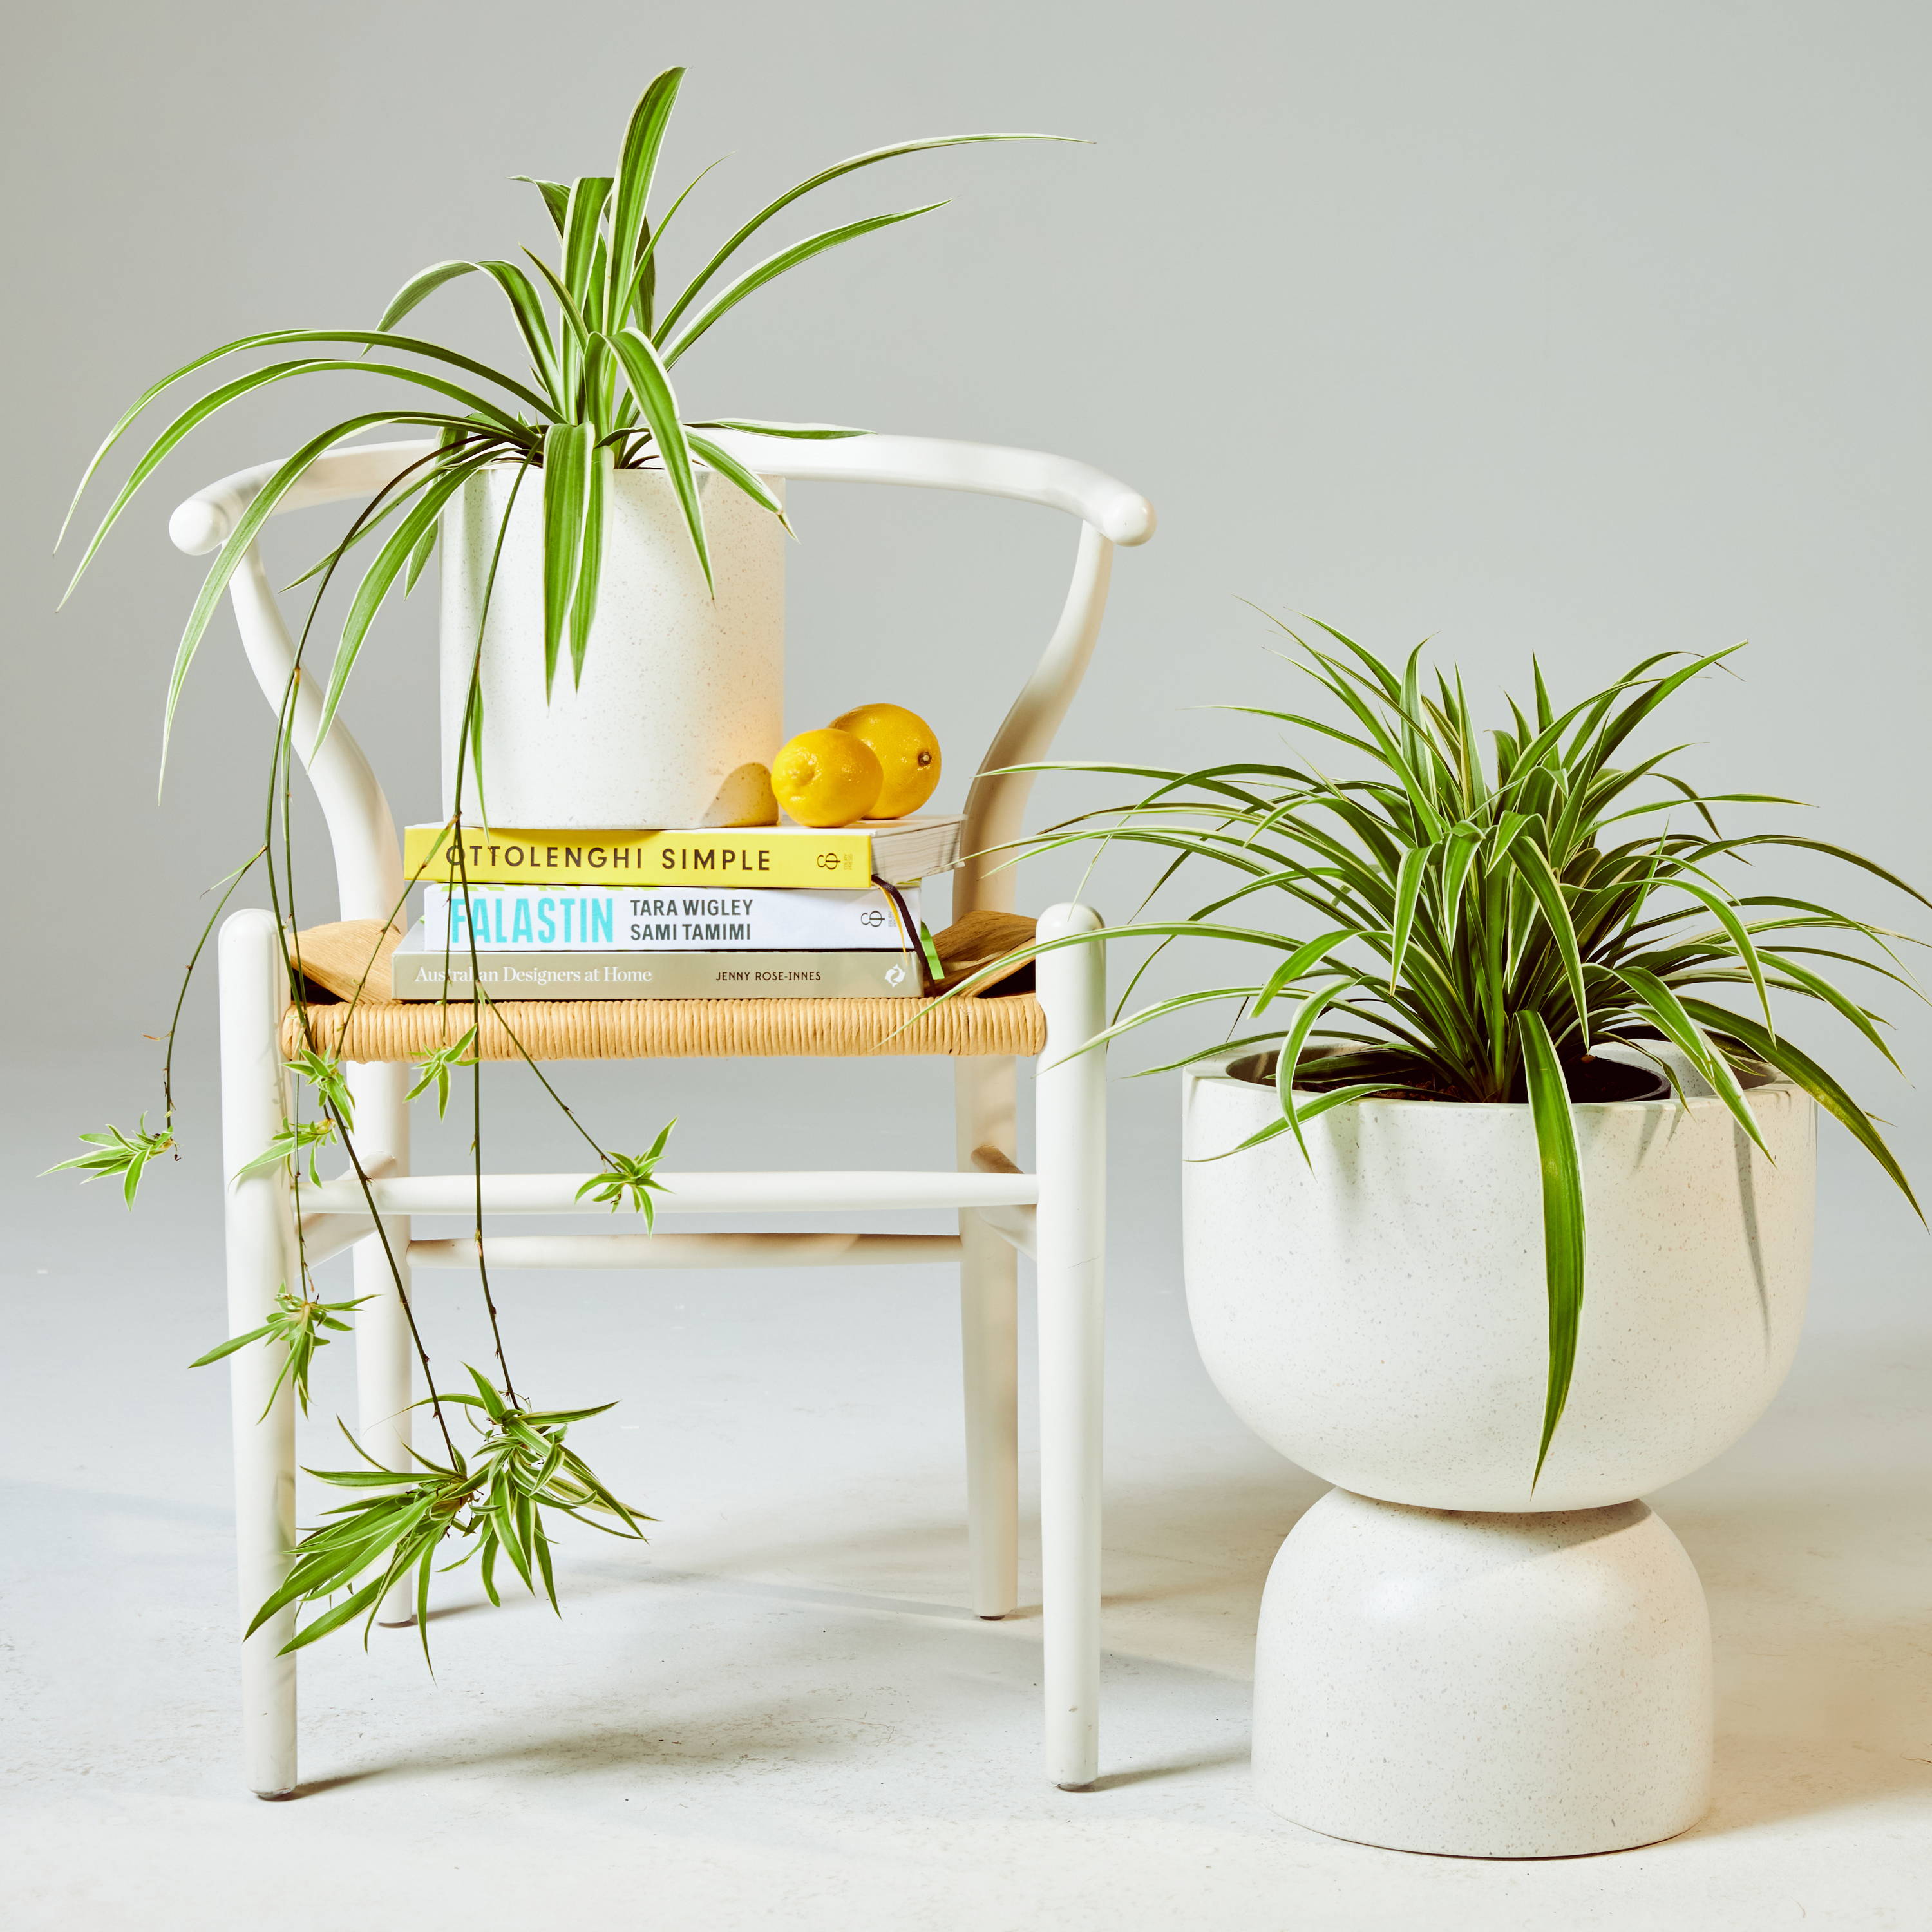 Spider Plants from The Good Plant Co